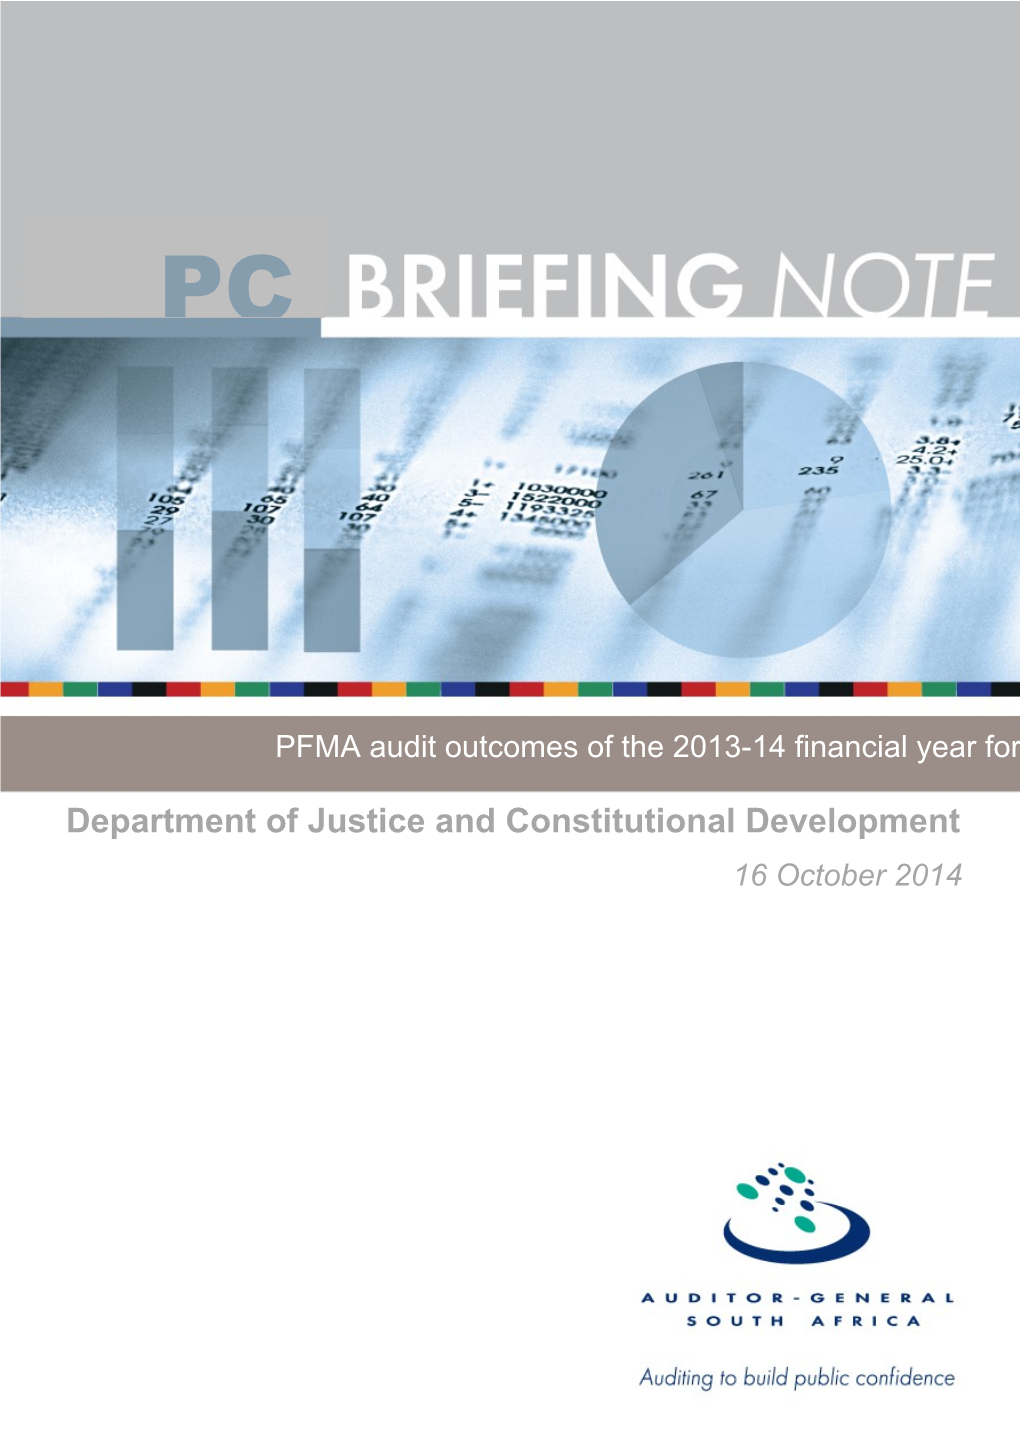 PC Briefing Note Financial Year 2013-14